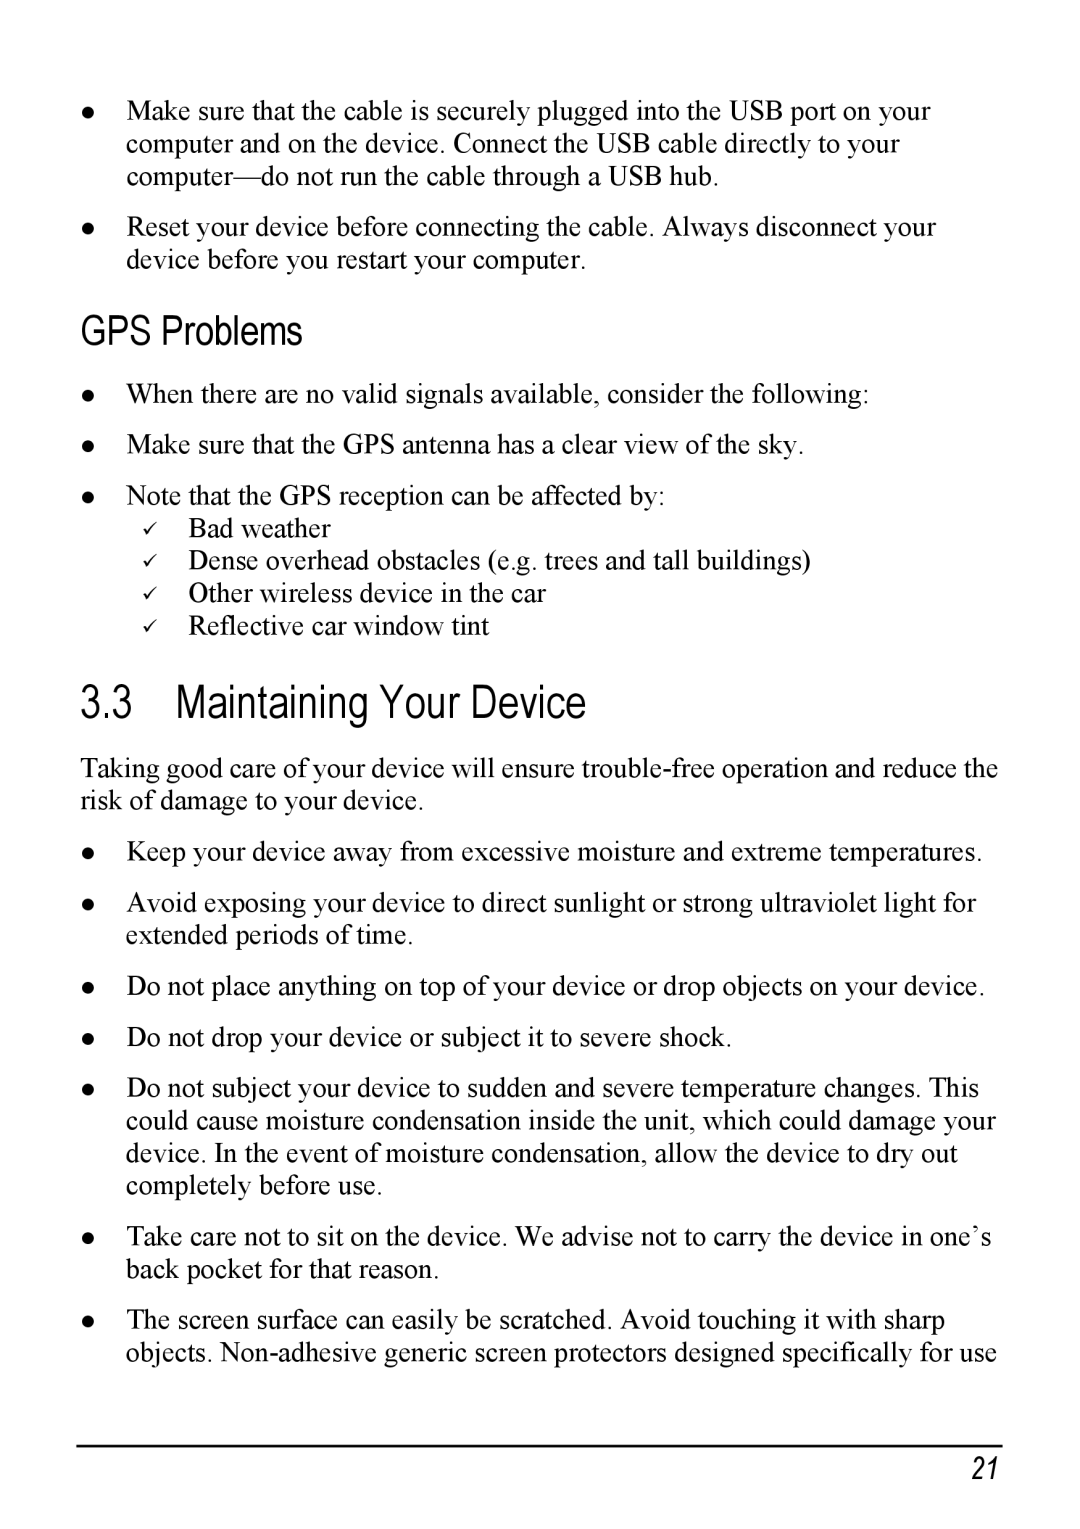 Jabra C220 manual 3.3Maintaining Your Device, GPS Problems 